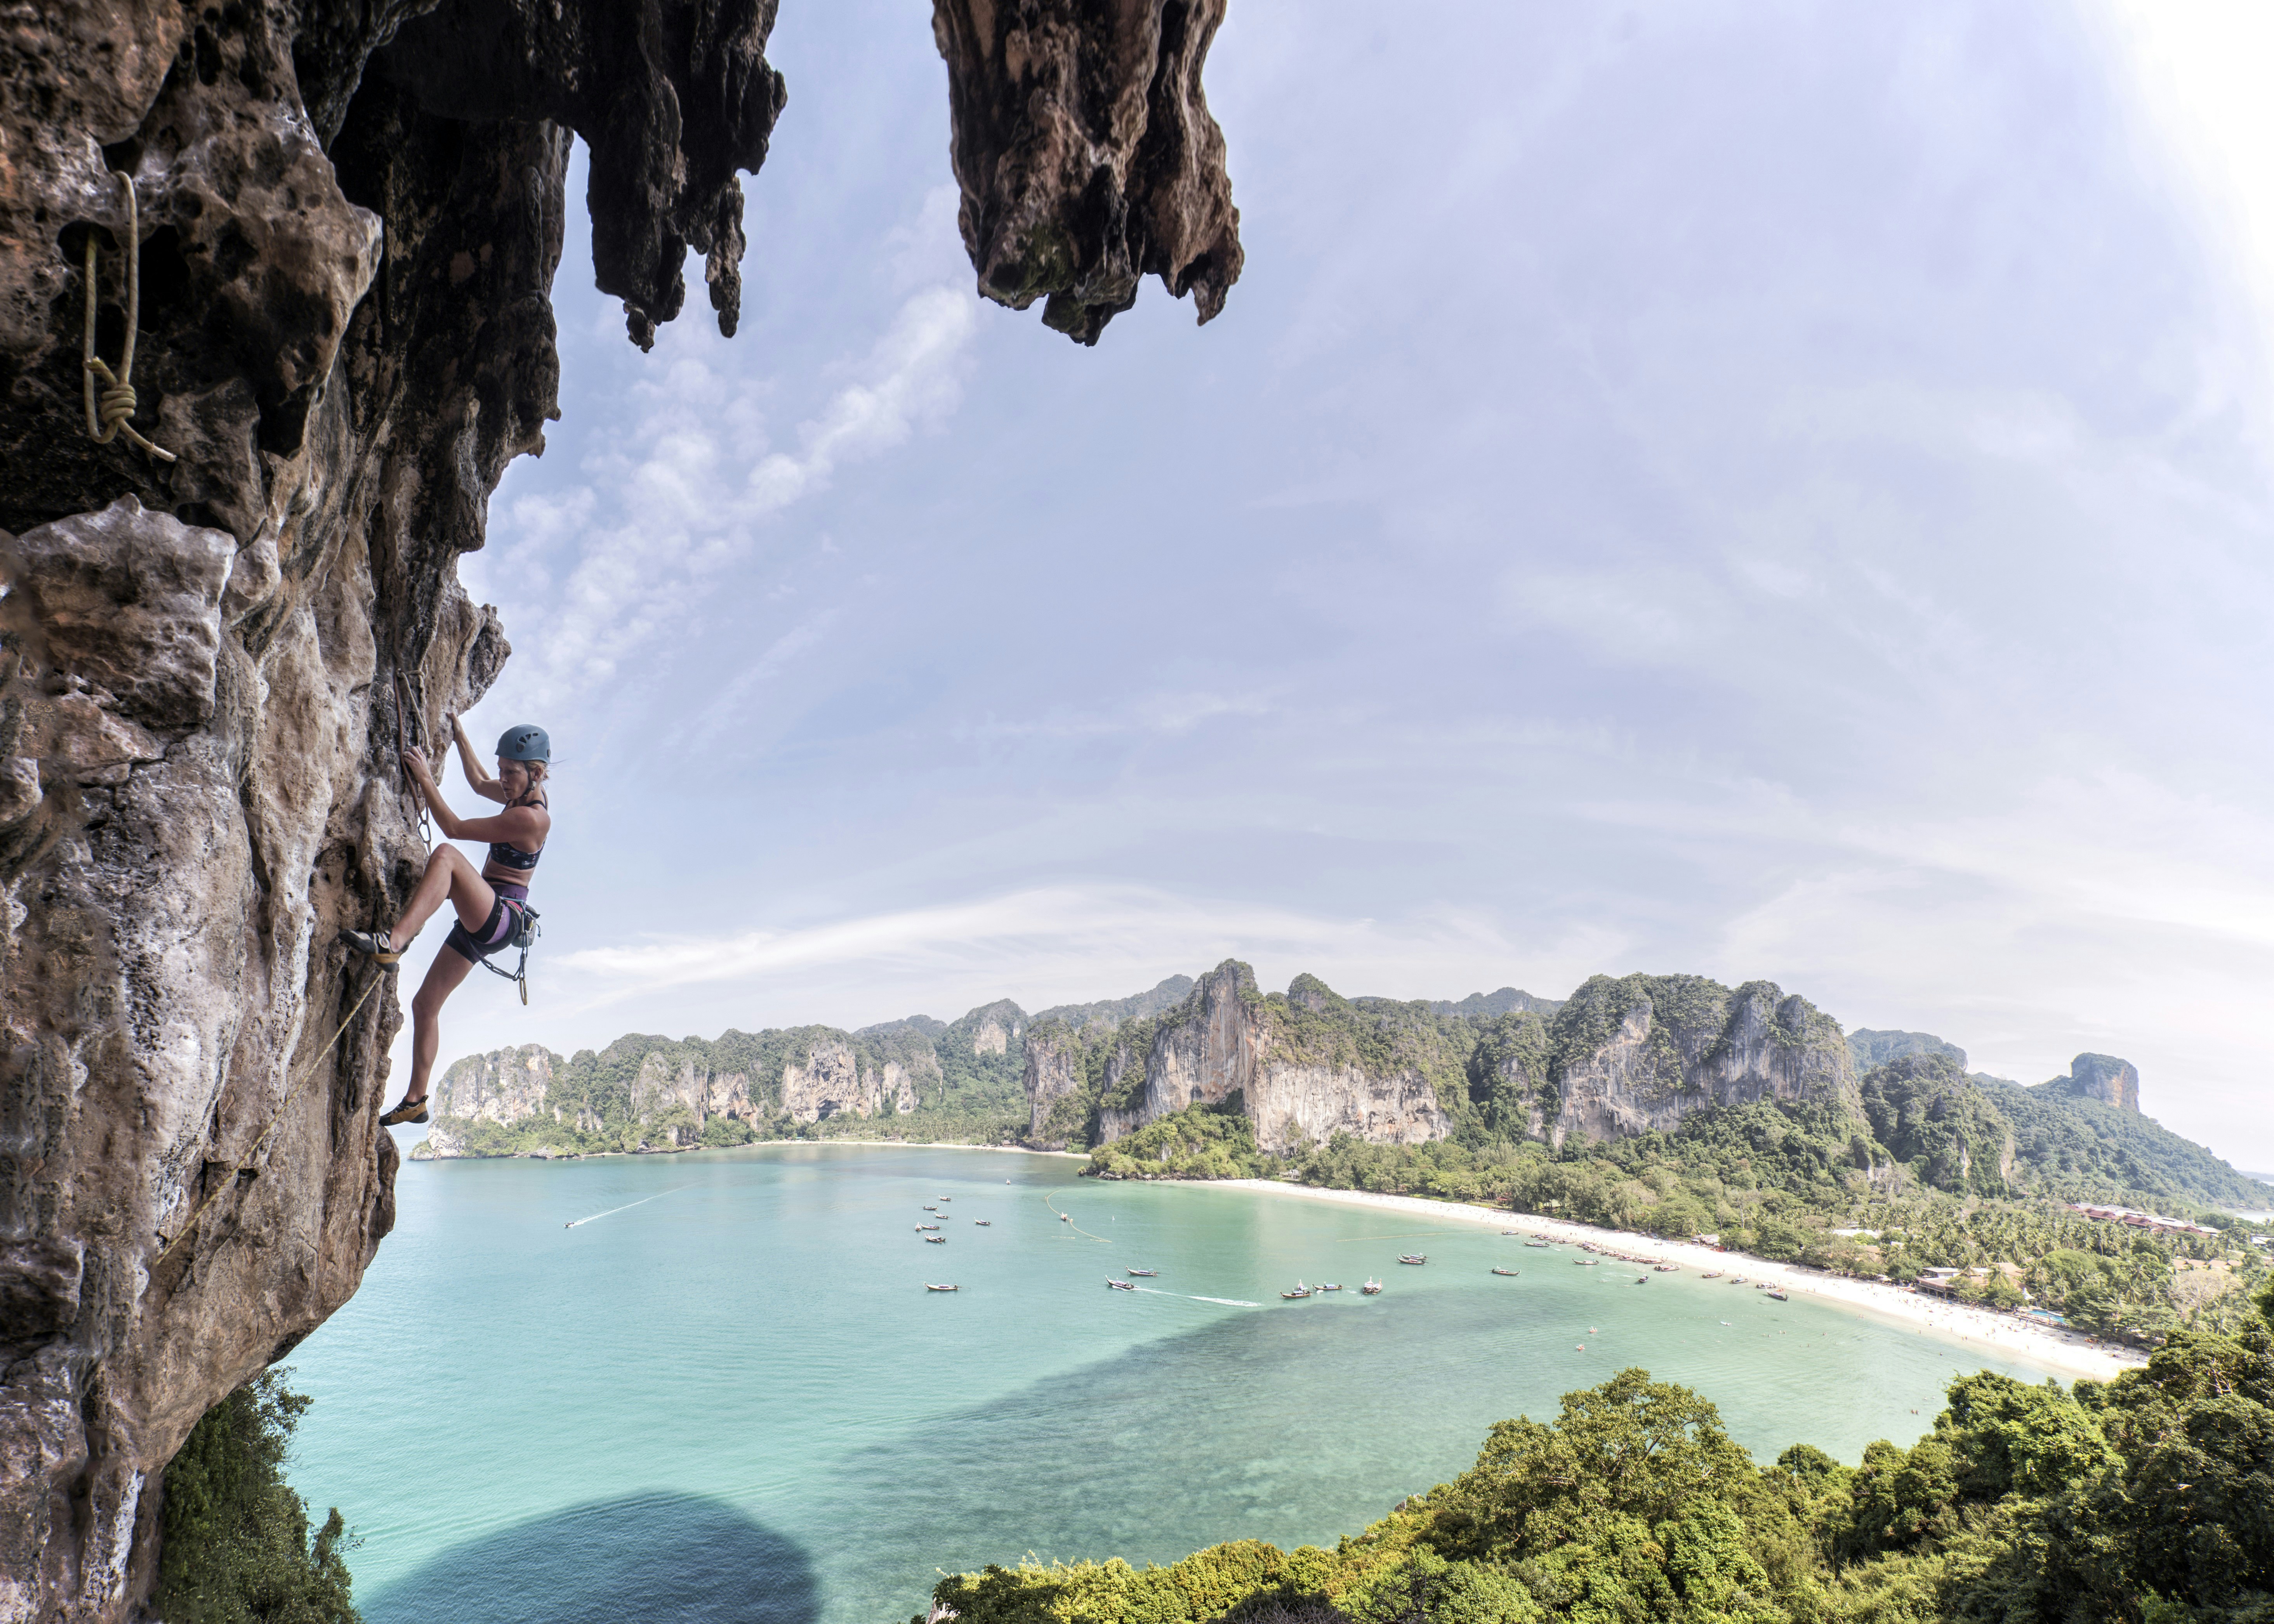 A rock climber scales a sheer rock face in Krabi, Thailand. In the background is a sweeping view of a white-sand beach and turquoise sea.